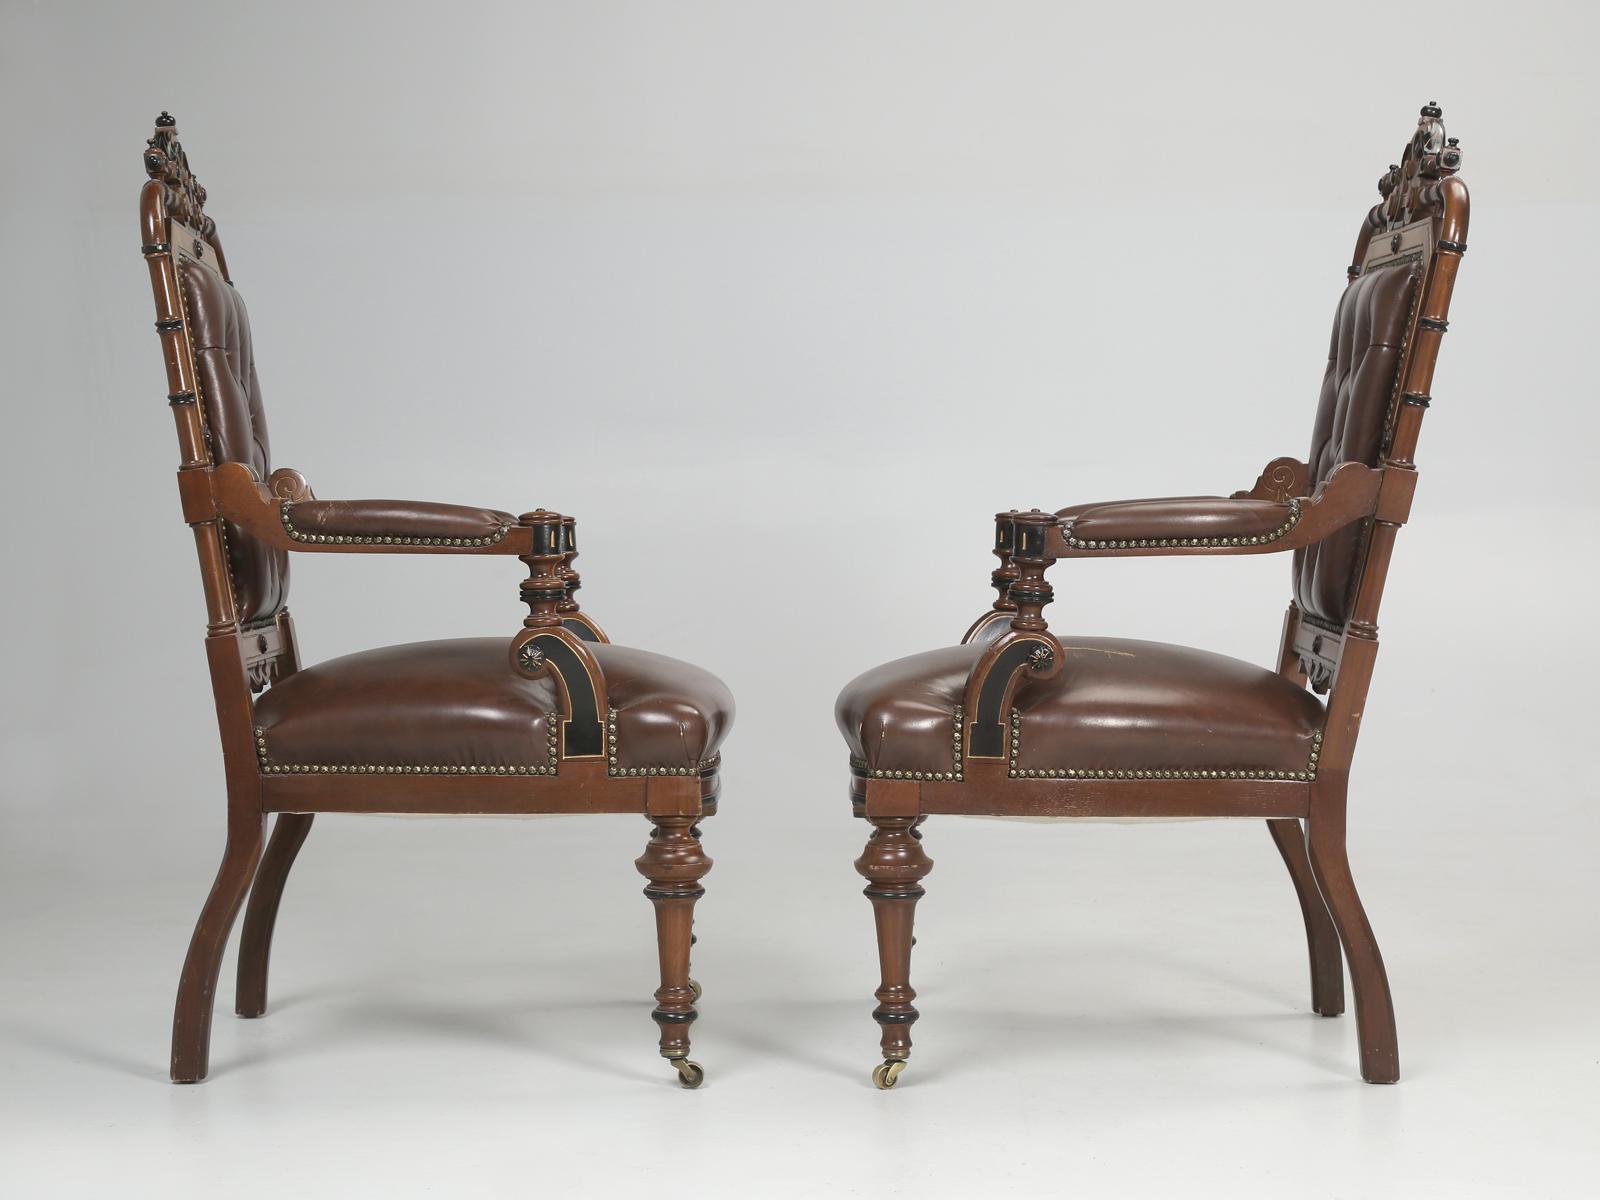 American Eastlake Victorian pair of arm chairs in the most unusual style. We cannot ever remember seeing faux bamboo used in the construction of Eastlake Victorian chairs. There are beautiful inlay details throughout the arm chairs with exquisite